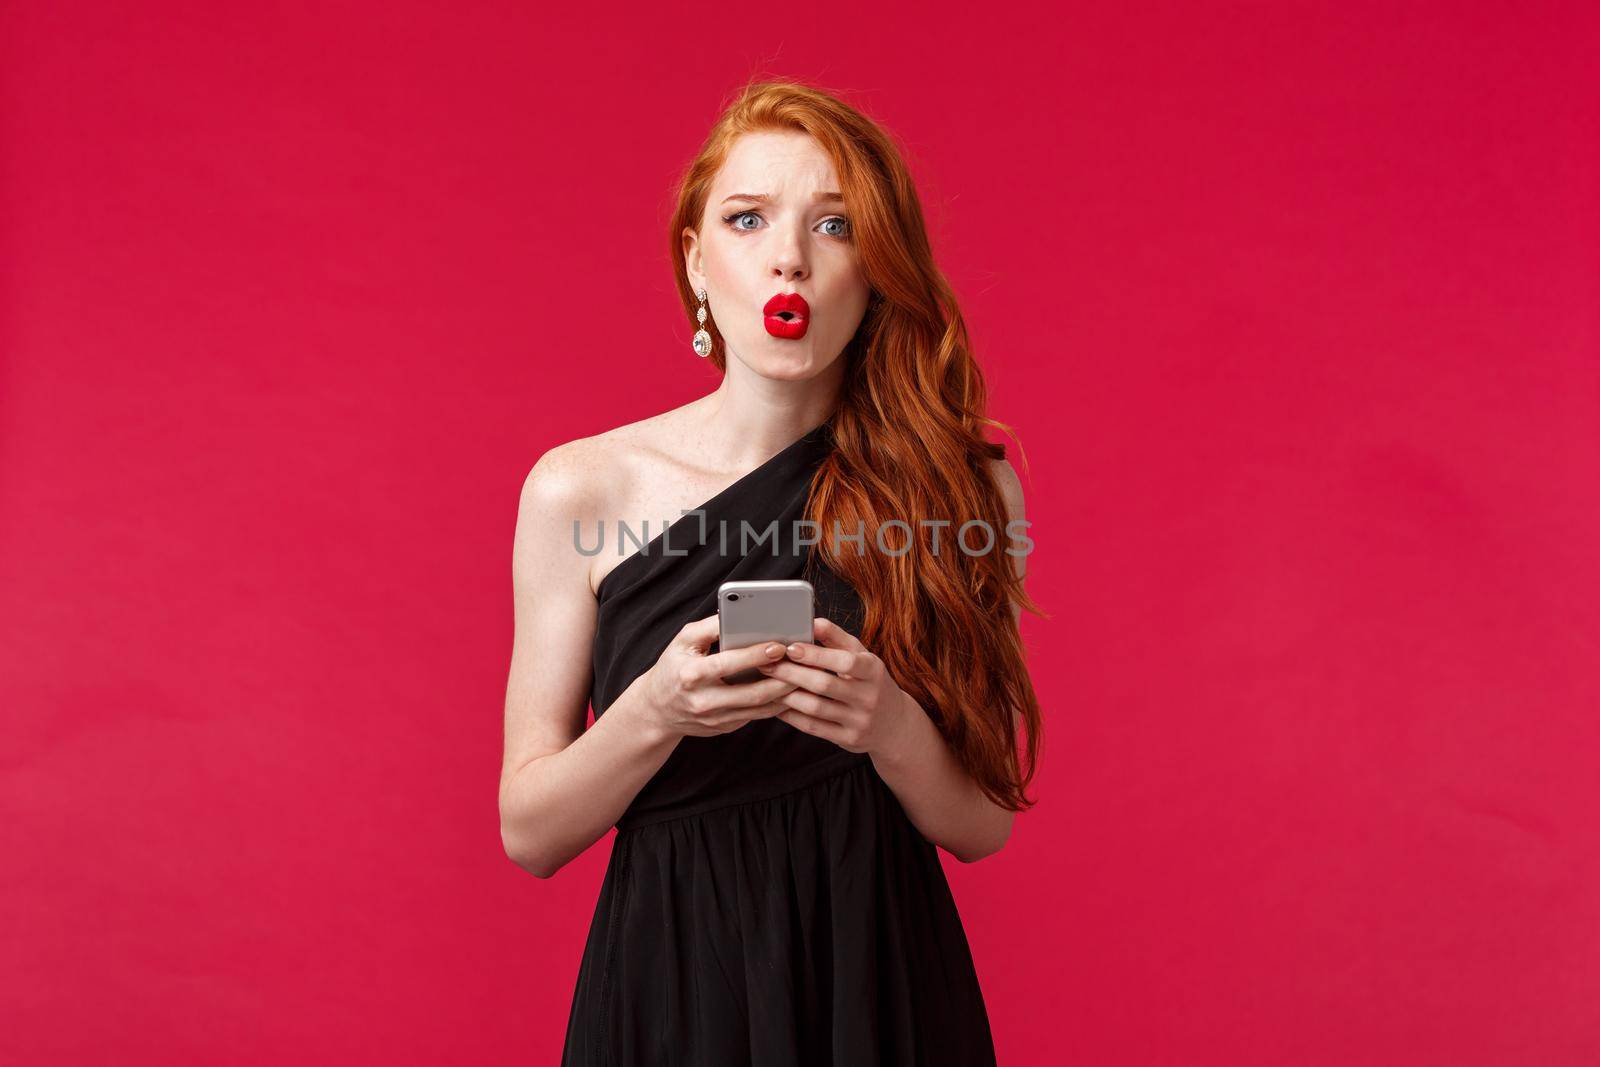 Portrait of concerned and confused young redhead woman being dumped by message on her prom night, look frustrated dont understand what happened, wear black dress, holding smartphone.